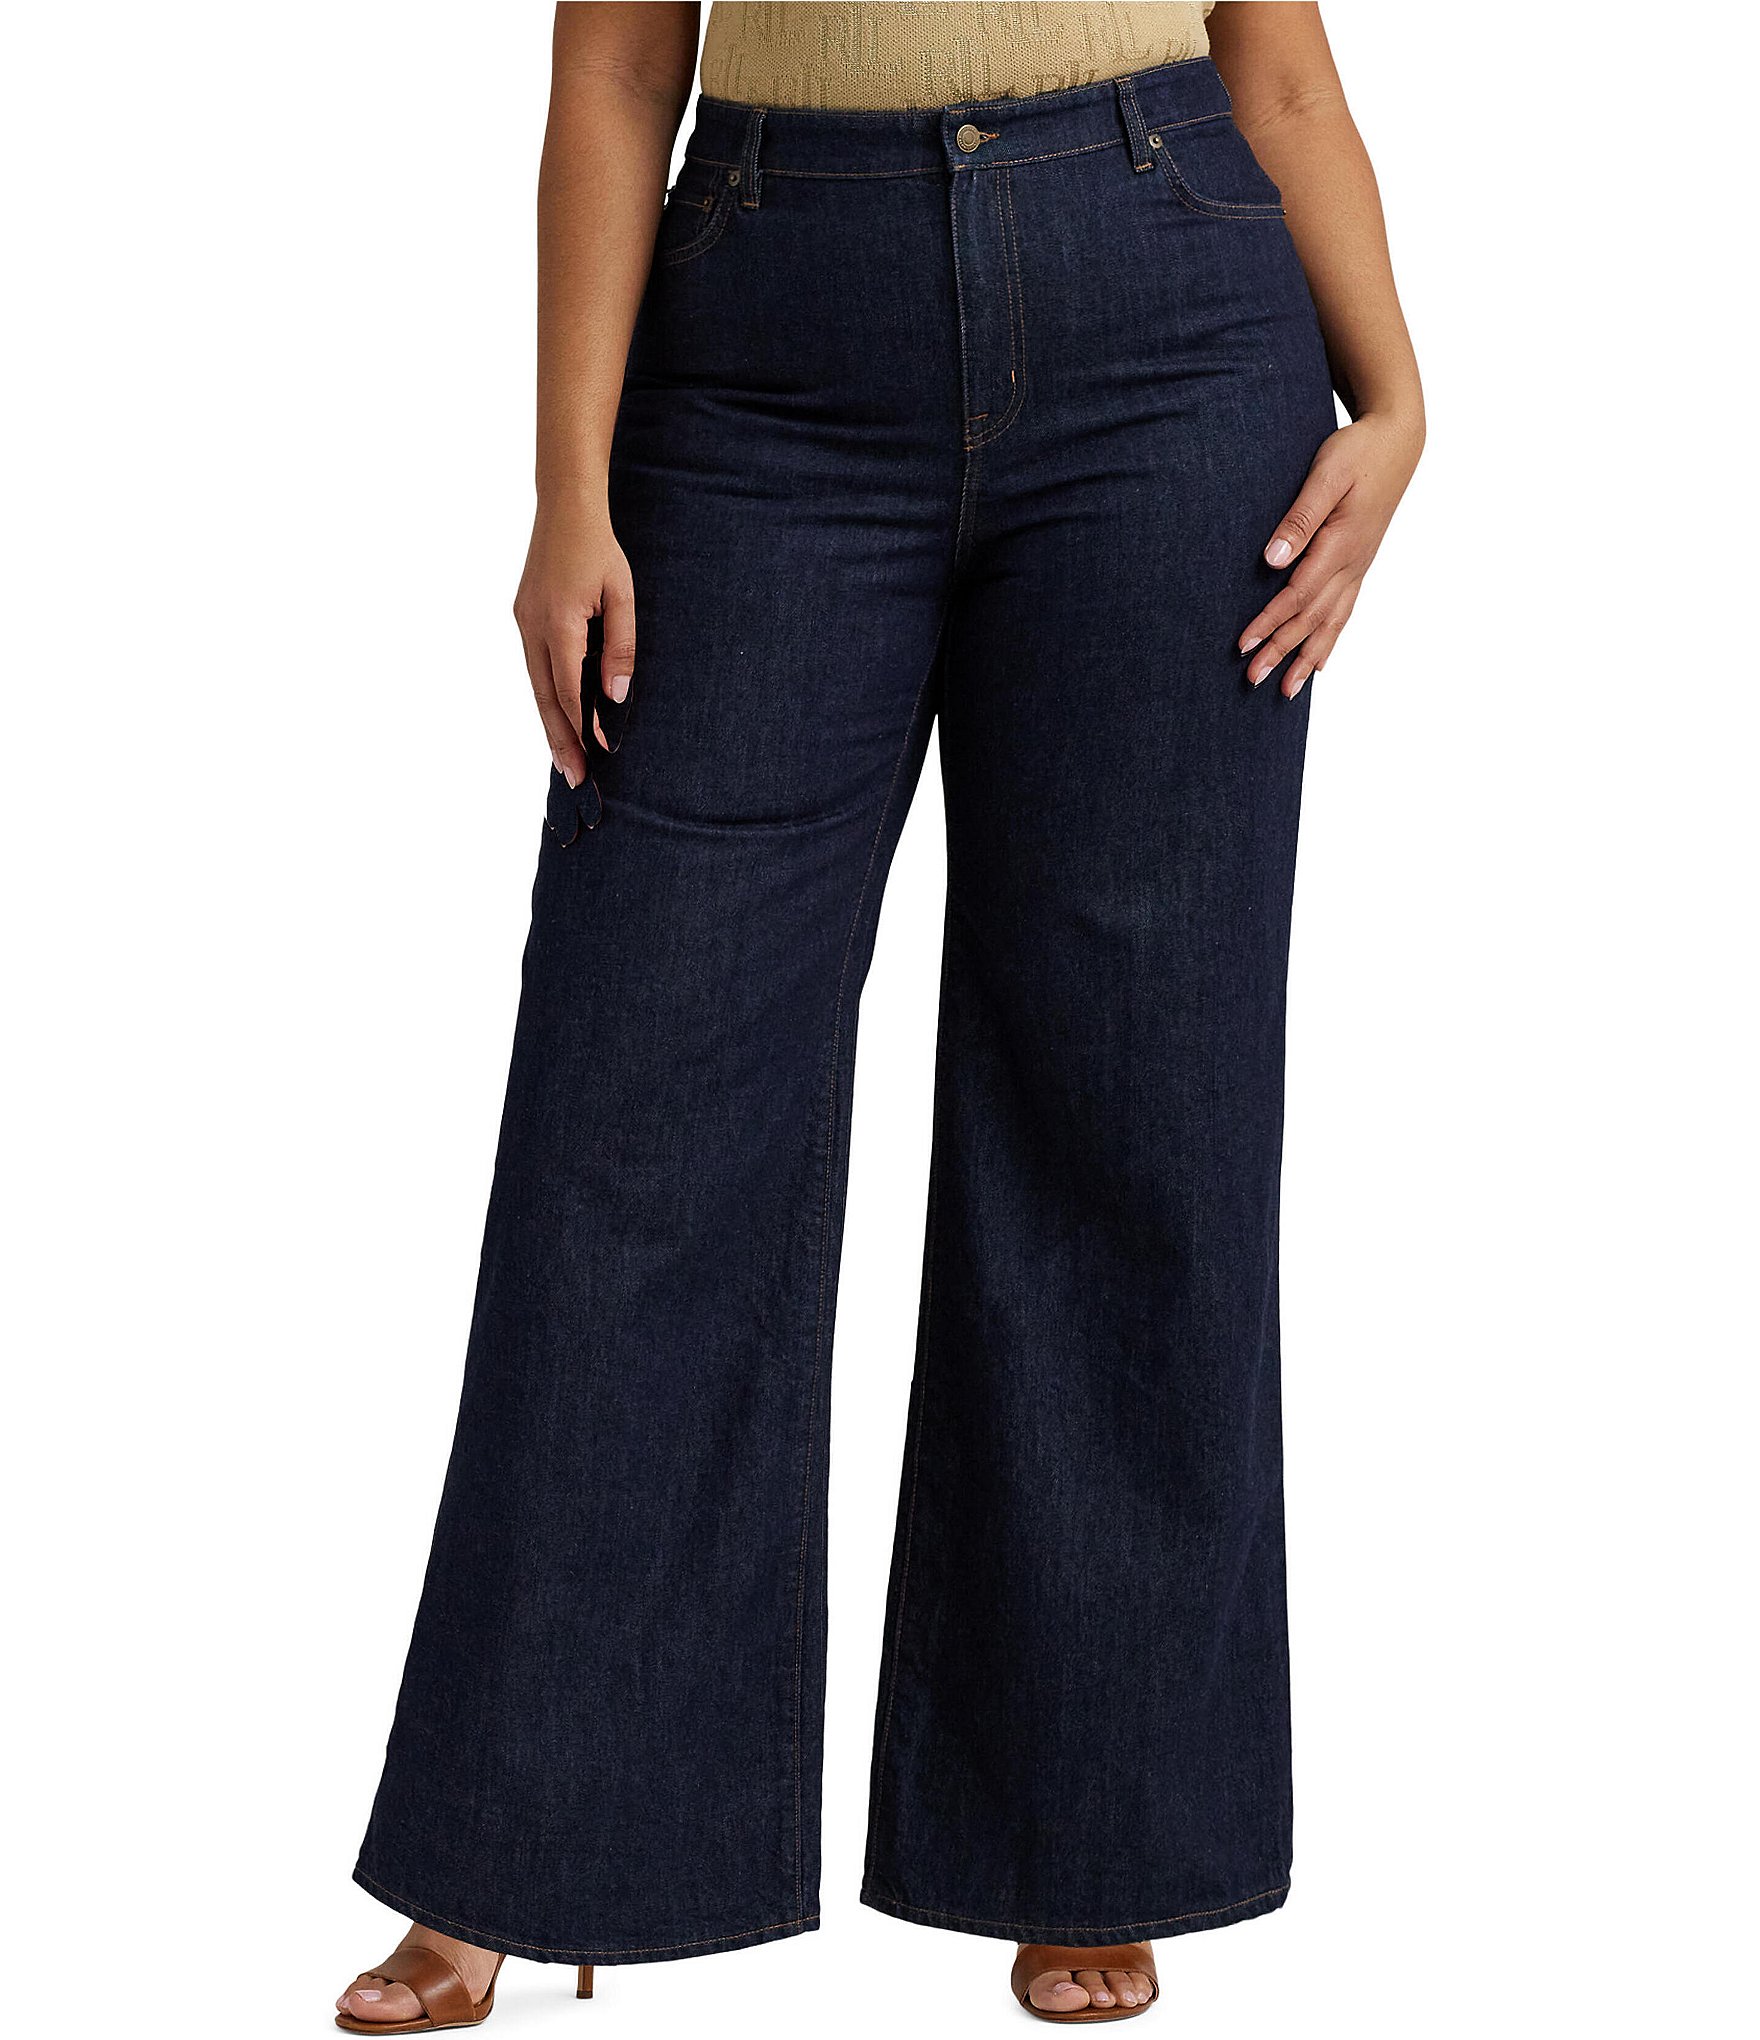 Plus Size Women's Wide Leg Cotton Jean by Woman Within in Medium Stonewash (Size  16 WP) - Yahoo Shopping